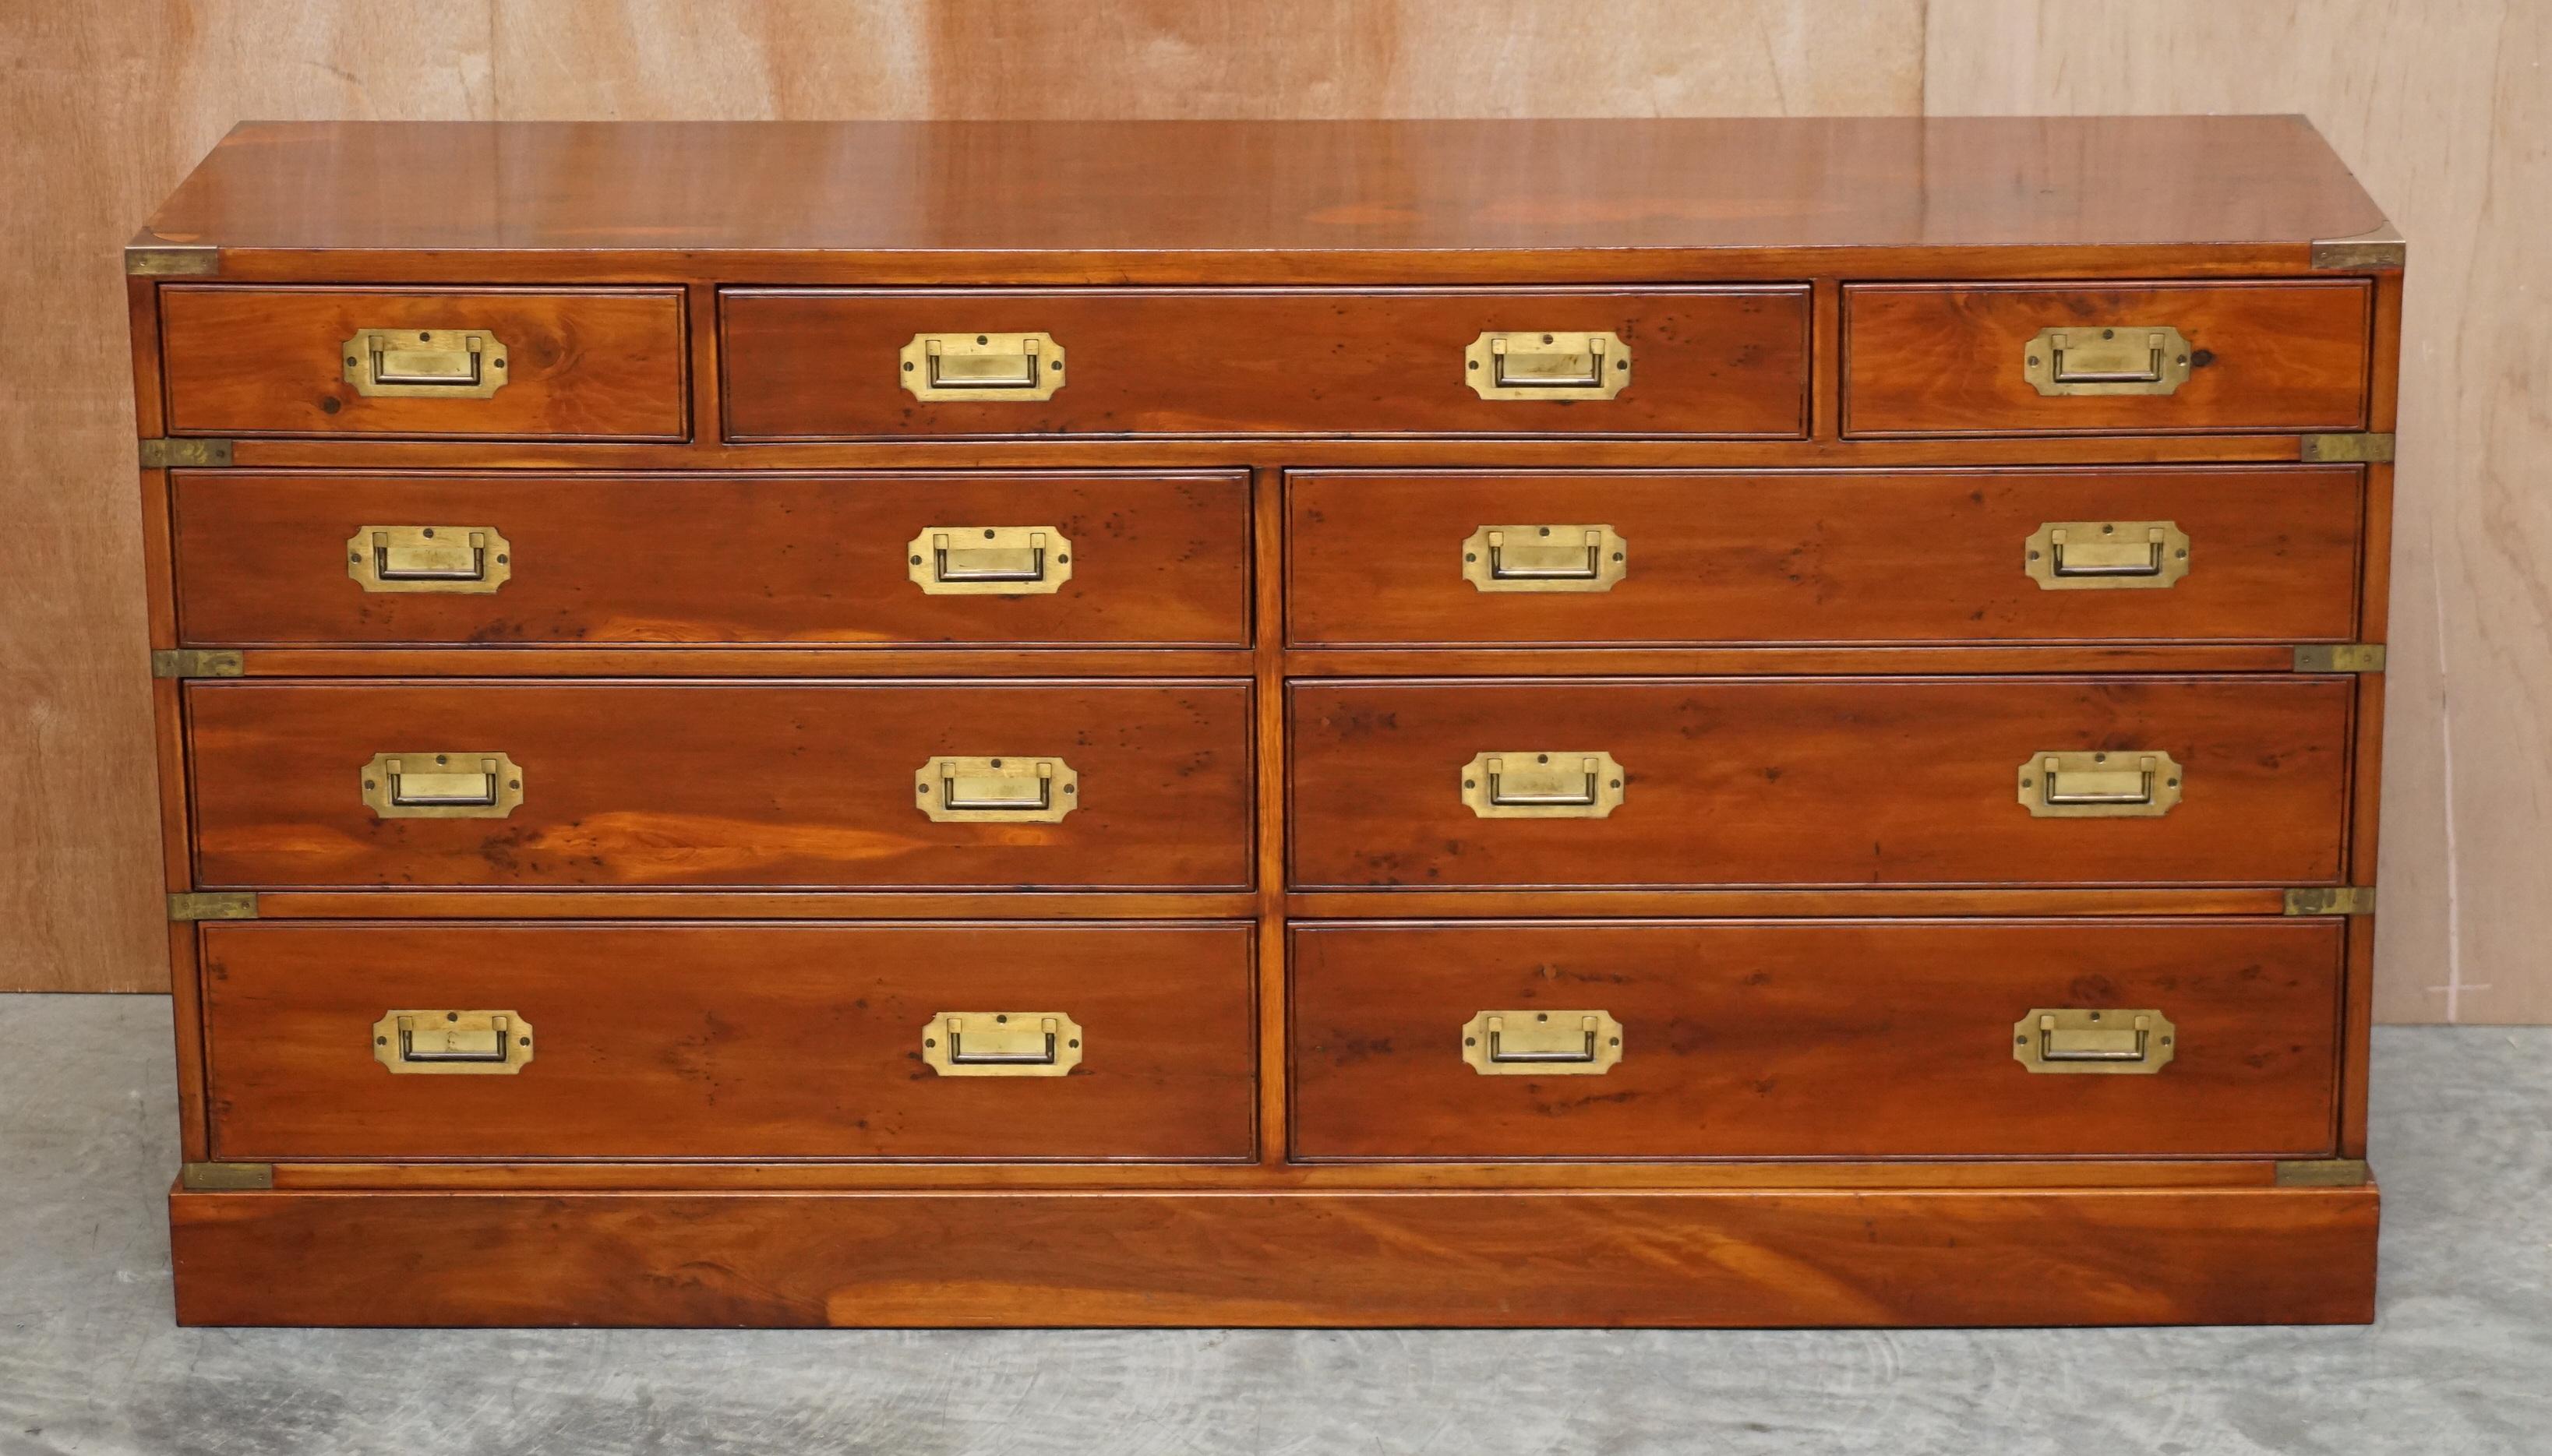 We are delighted to offer for sale this lovely Burr Yew wood & Brass mounted Military Campaign sideboard bank of drawers

A very good looking and decorative sideboard, Campaign furniture has been highly coveted for over 140 years, this is a rather